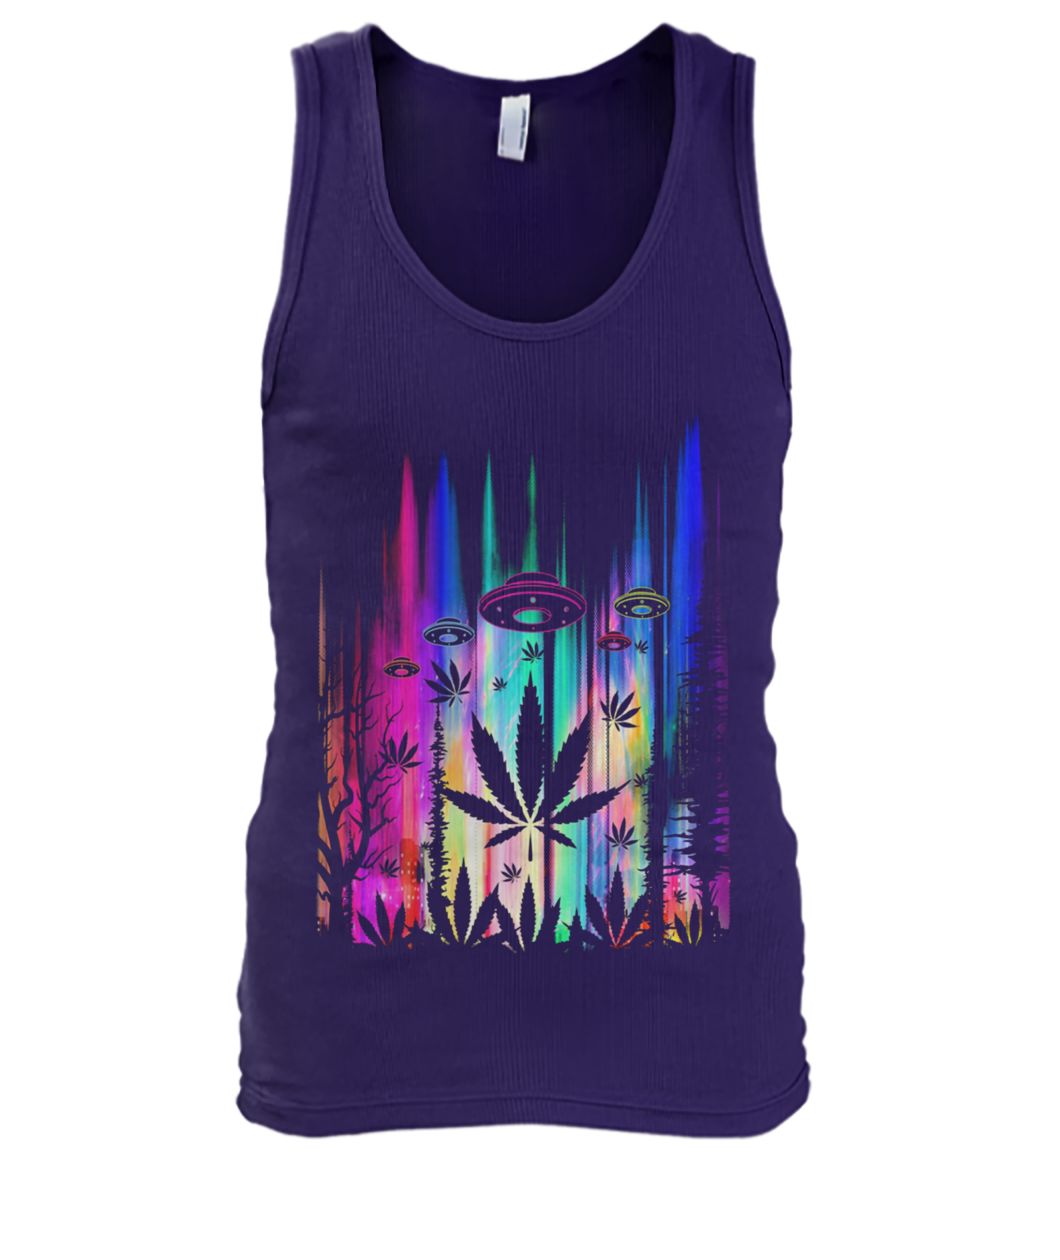 Storm area 51 they can't stop all of us weed men's tank top